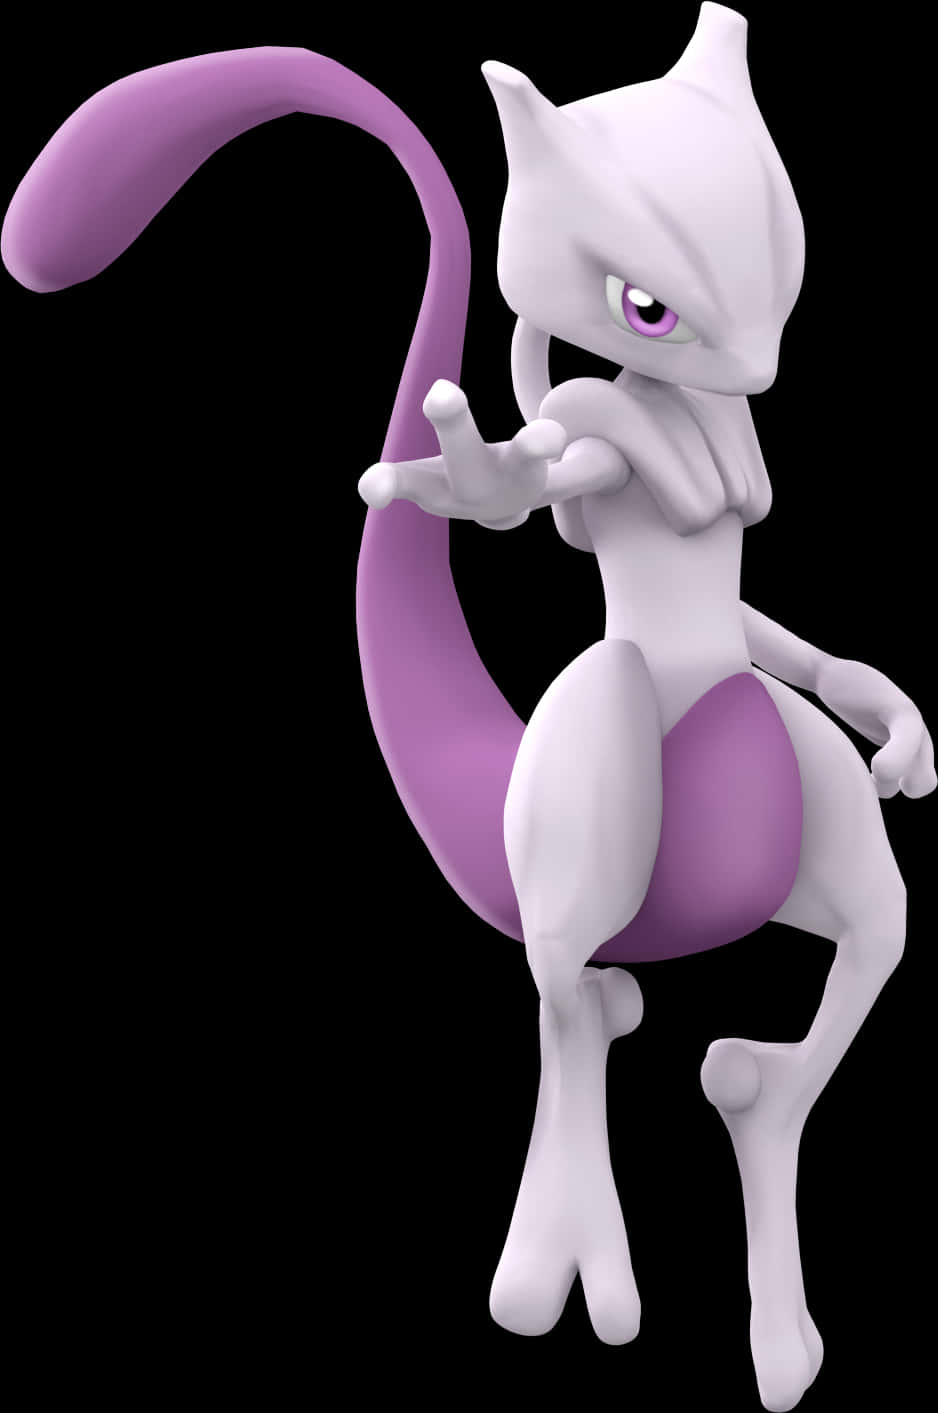 A Cartoon Character Of A Purple And White Animal